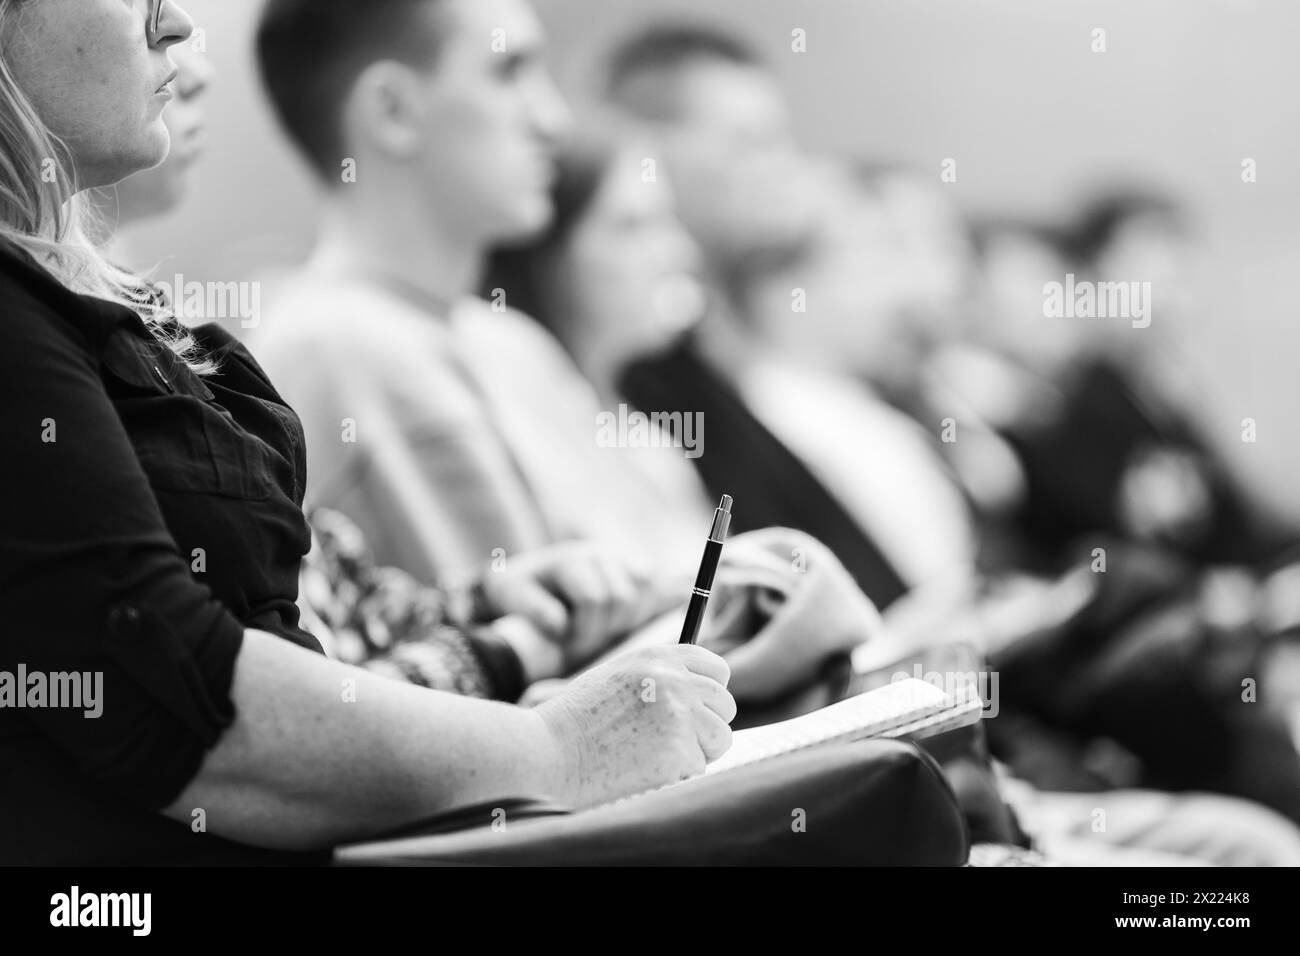 Female hands holding pen and notebook, making notes at conference lecture. Event participants in conference hall. Black and white image Stock Photo